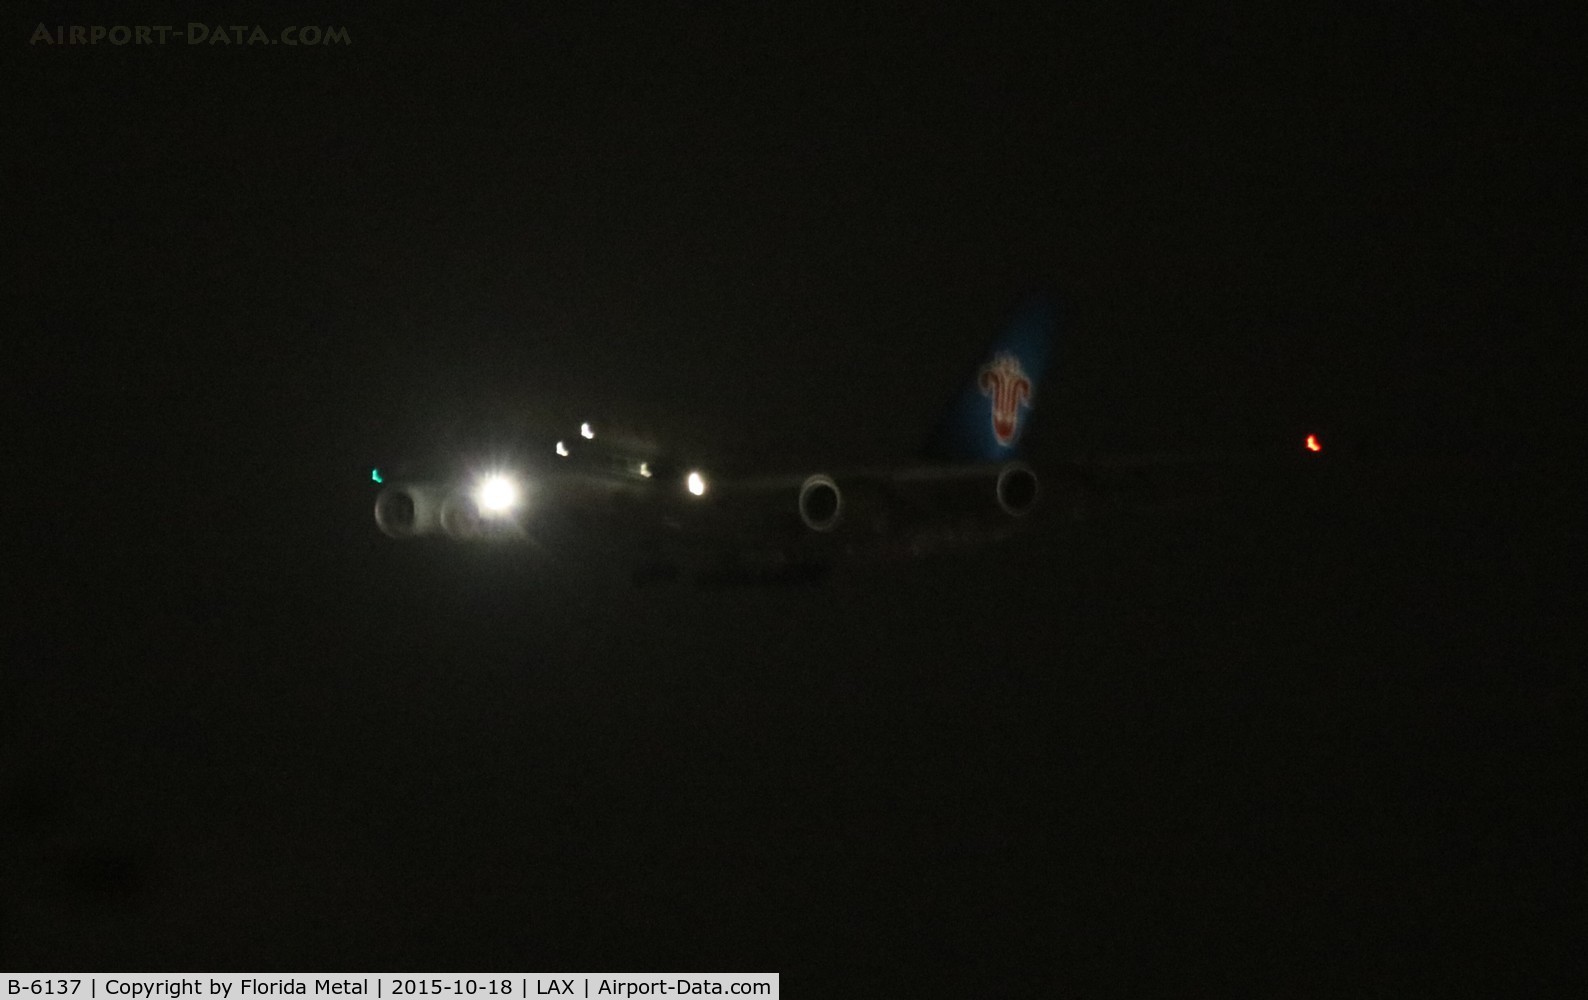 B-6137, 2011 Airbus A380-841 C/N 036, My only chance to get a China Southern A380 - comes in the dark